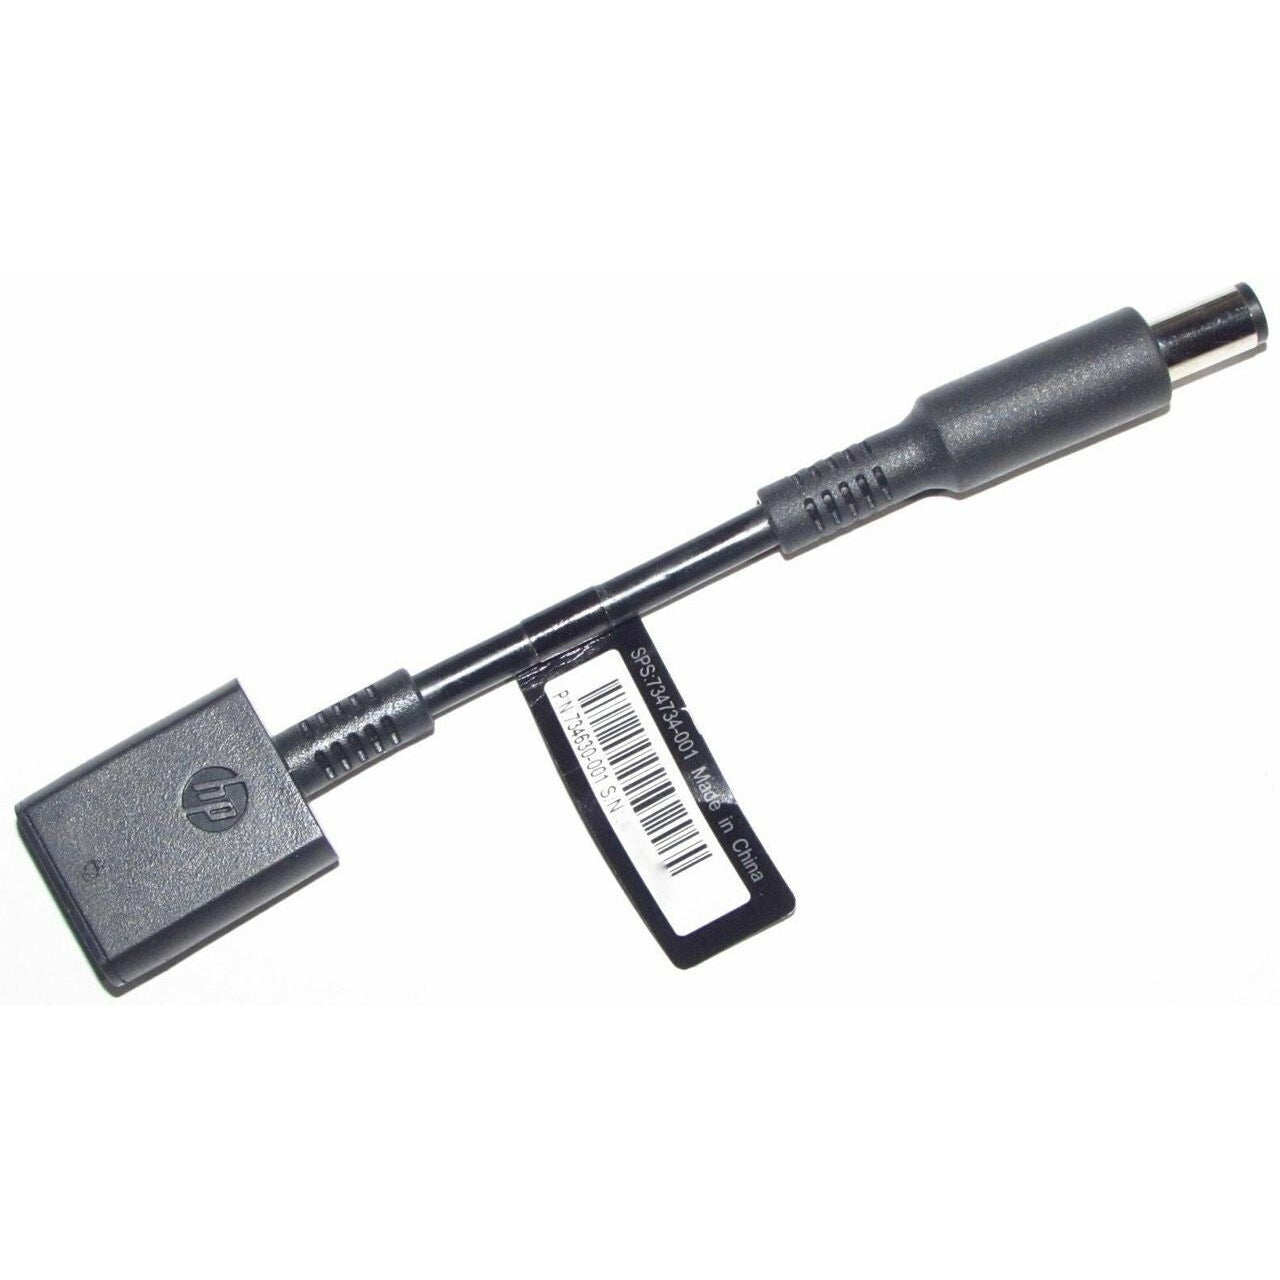 HP 825026-001 4.5mm to 7.5mm Smart Adapter